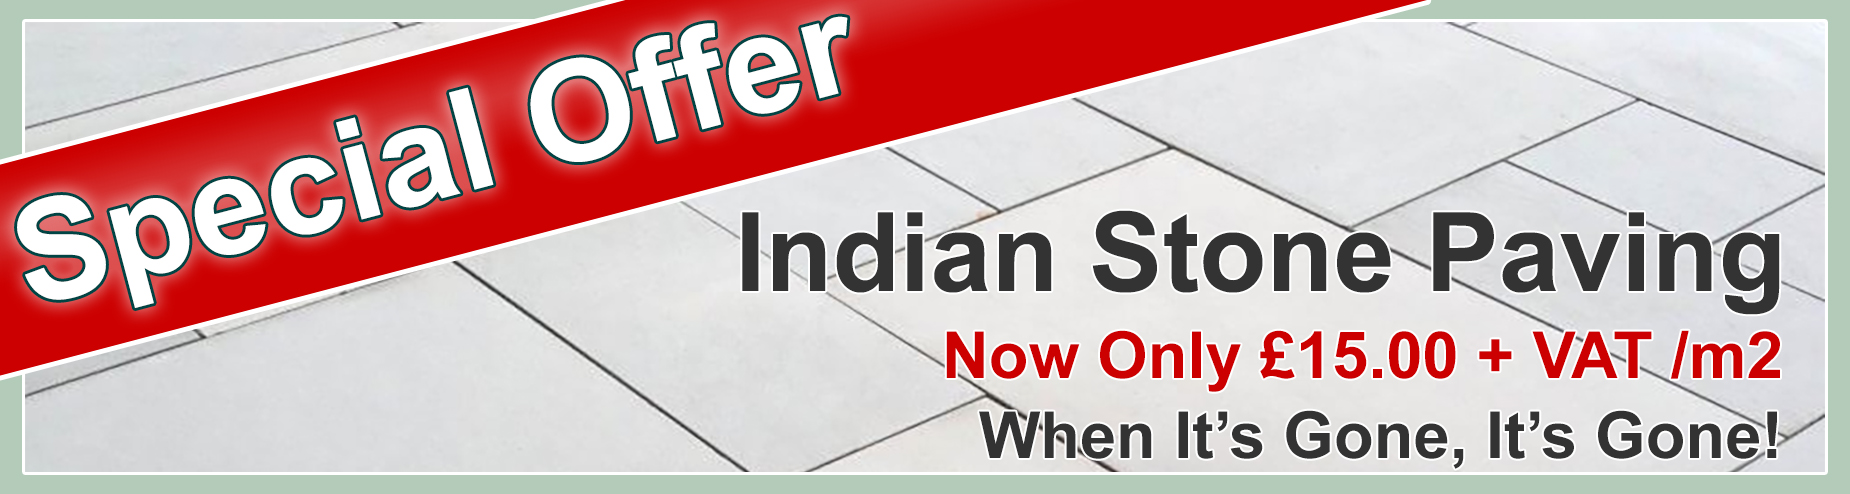 Special Offer on Indian Stone Paving